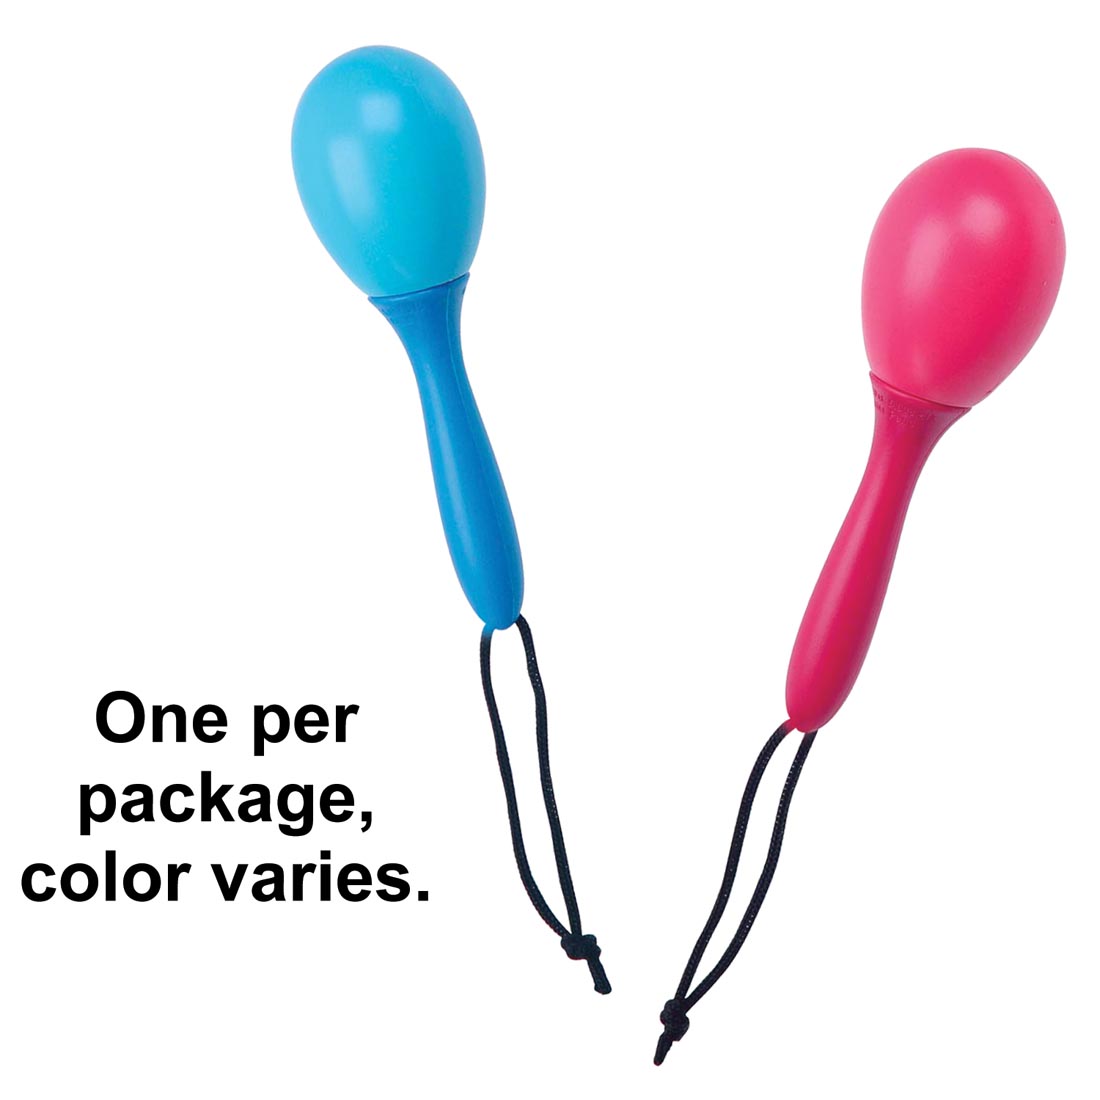 Two different Li'l Cha Cha Maracas with the text One per package, color varies.